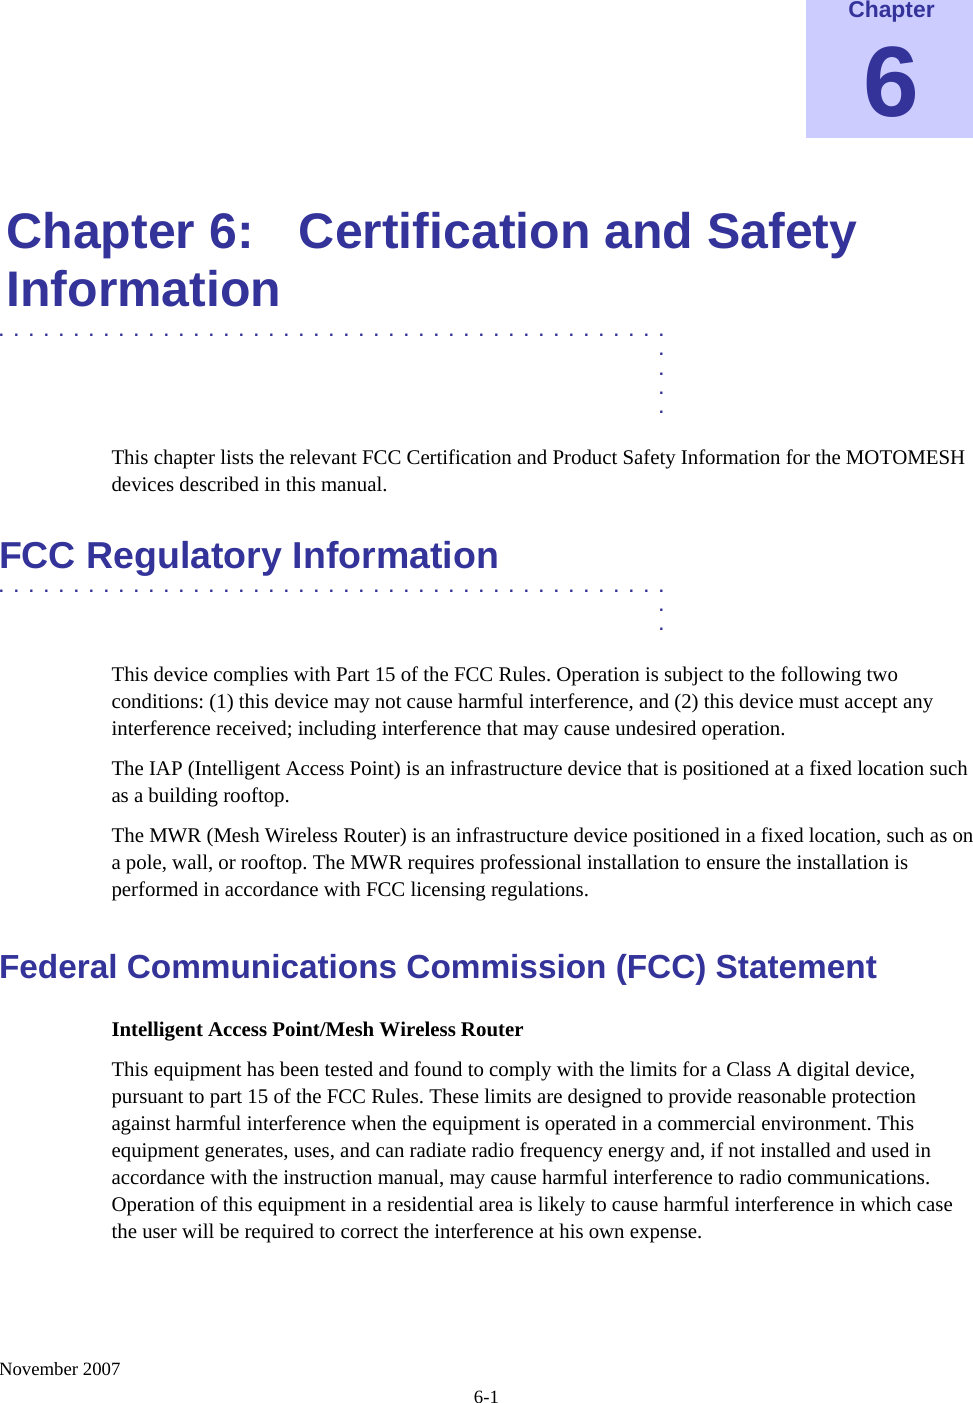    November 2007 6-1 Chapter 6  Chapter 6:  Certification and Safety Information .............................................  .  .  .  . This chapter lists the relevant FCC Certification and Product Safety Information for the MOTOMESH devices described in this manual. FCC Regulatory Information .............................................  .  . This device complies with Part 15 of the FCC Rules. Operation is subject to the following two conditions: (1) this device may not cause harmful interference, and (2) this device must accept any interference received; including interference that may cause undesired operation. The IAP (Intelligent Access Point) is an infrastructure device that is positioned at a fixed location such as a building rooftop.  The MWR (Mesh Wireless Router) is an infrastructure device positioned in a fixed location, such as on a pole, wall, or rooftop. The MWR requires professional installation to ensure the installation is performed in accordance with FCC licensing regulations. Federal Communications Commission (FCC) Statement Intelligent Access Point/Mesh Wireless Router This equipment has been tested and found to comply with the limits for a Class A digital device, pursuant to part 15 of the FCC Rules. These limits are designed to provide reasonable protection against harmful interference when the equipment is operated in a commercial environment. This equipment generates, uses, and can radiate radio frequency energy and, if not installed and used in accordance with the instruction manual, may cause harmful interference to radio communications. Operation of this equipment in a residential area is likely to cause harmful interference in which case the user will be required to correct the interference at his own expense.  